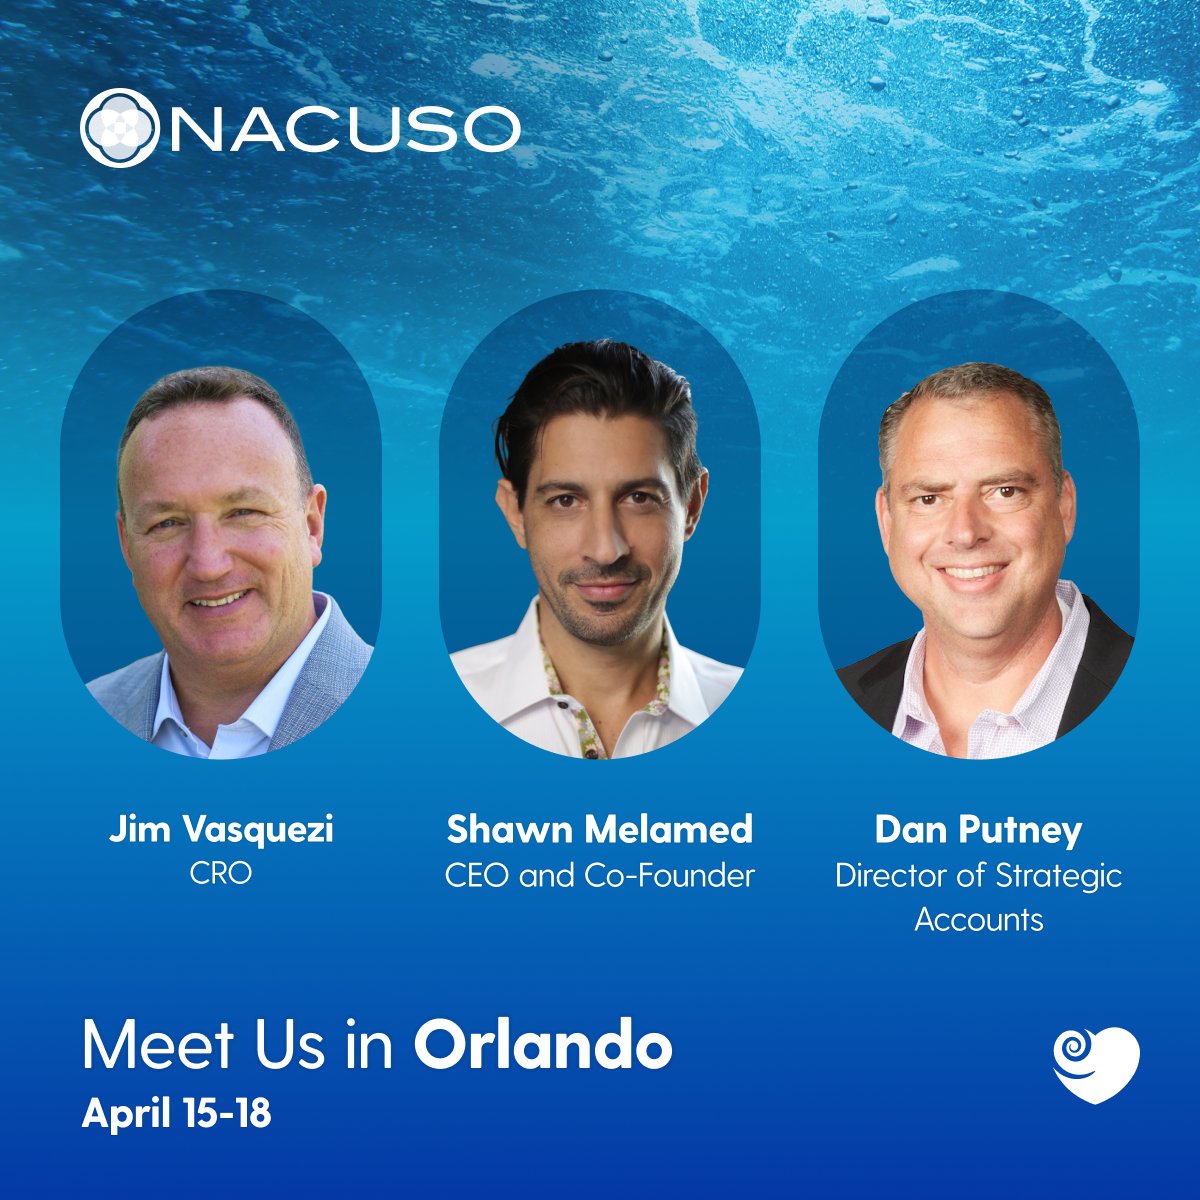 Team Spiral is going to Orlando for the #NACUSONetwork Conference April 15-18! ☀️ We’re excited to share how we’re revolutionizing the financial industry and positioning #CreditUnions for success! 💖 Connect with us in advance here: bit.ly/NACUSO